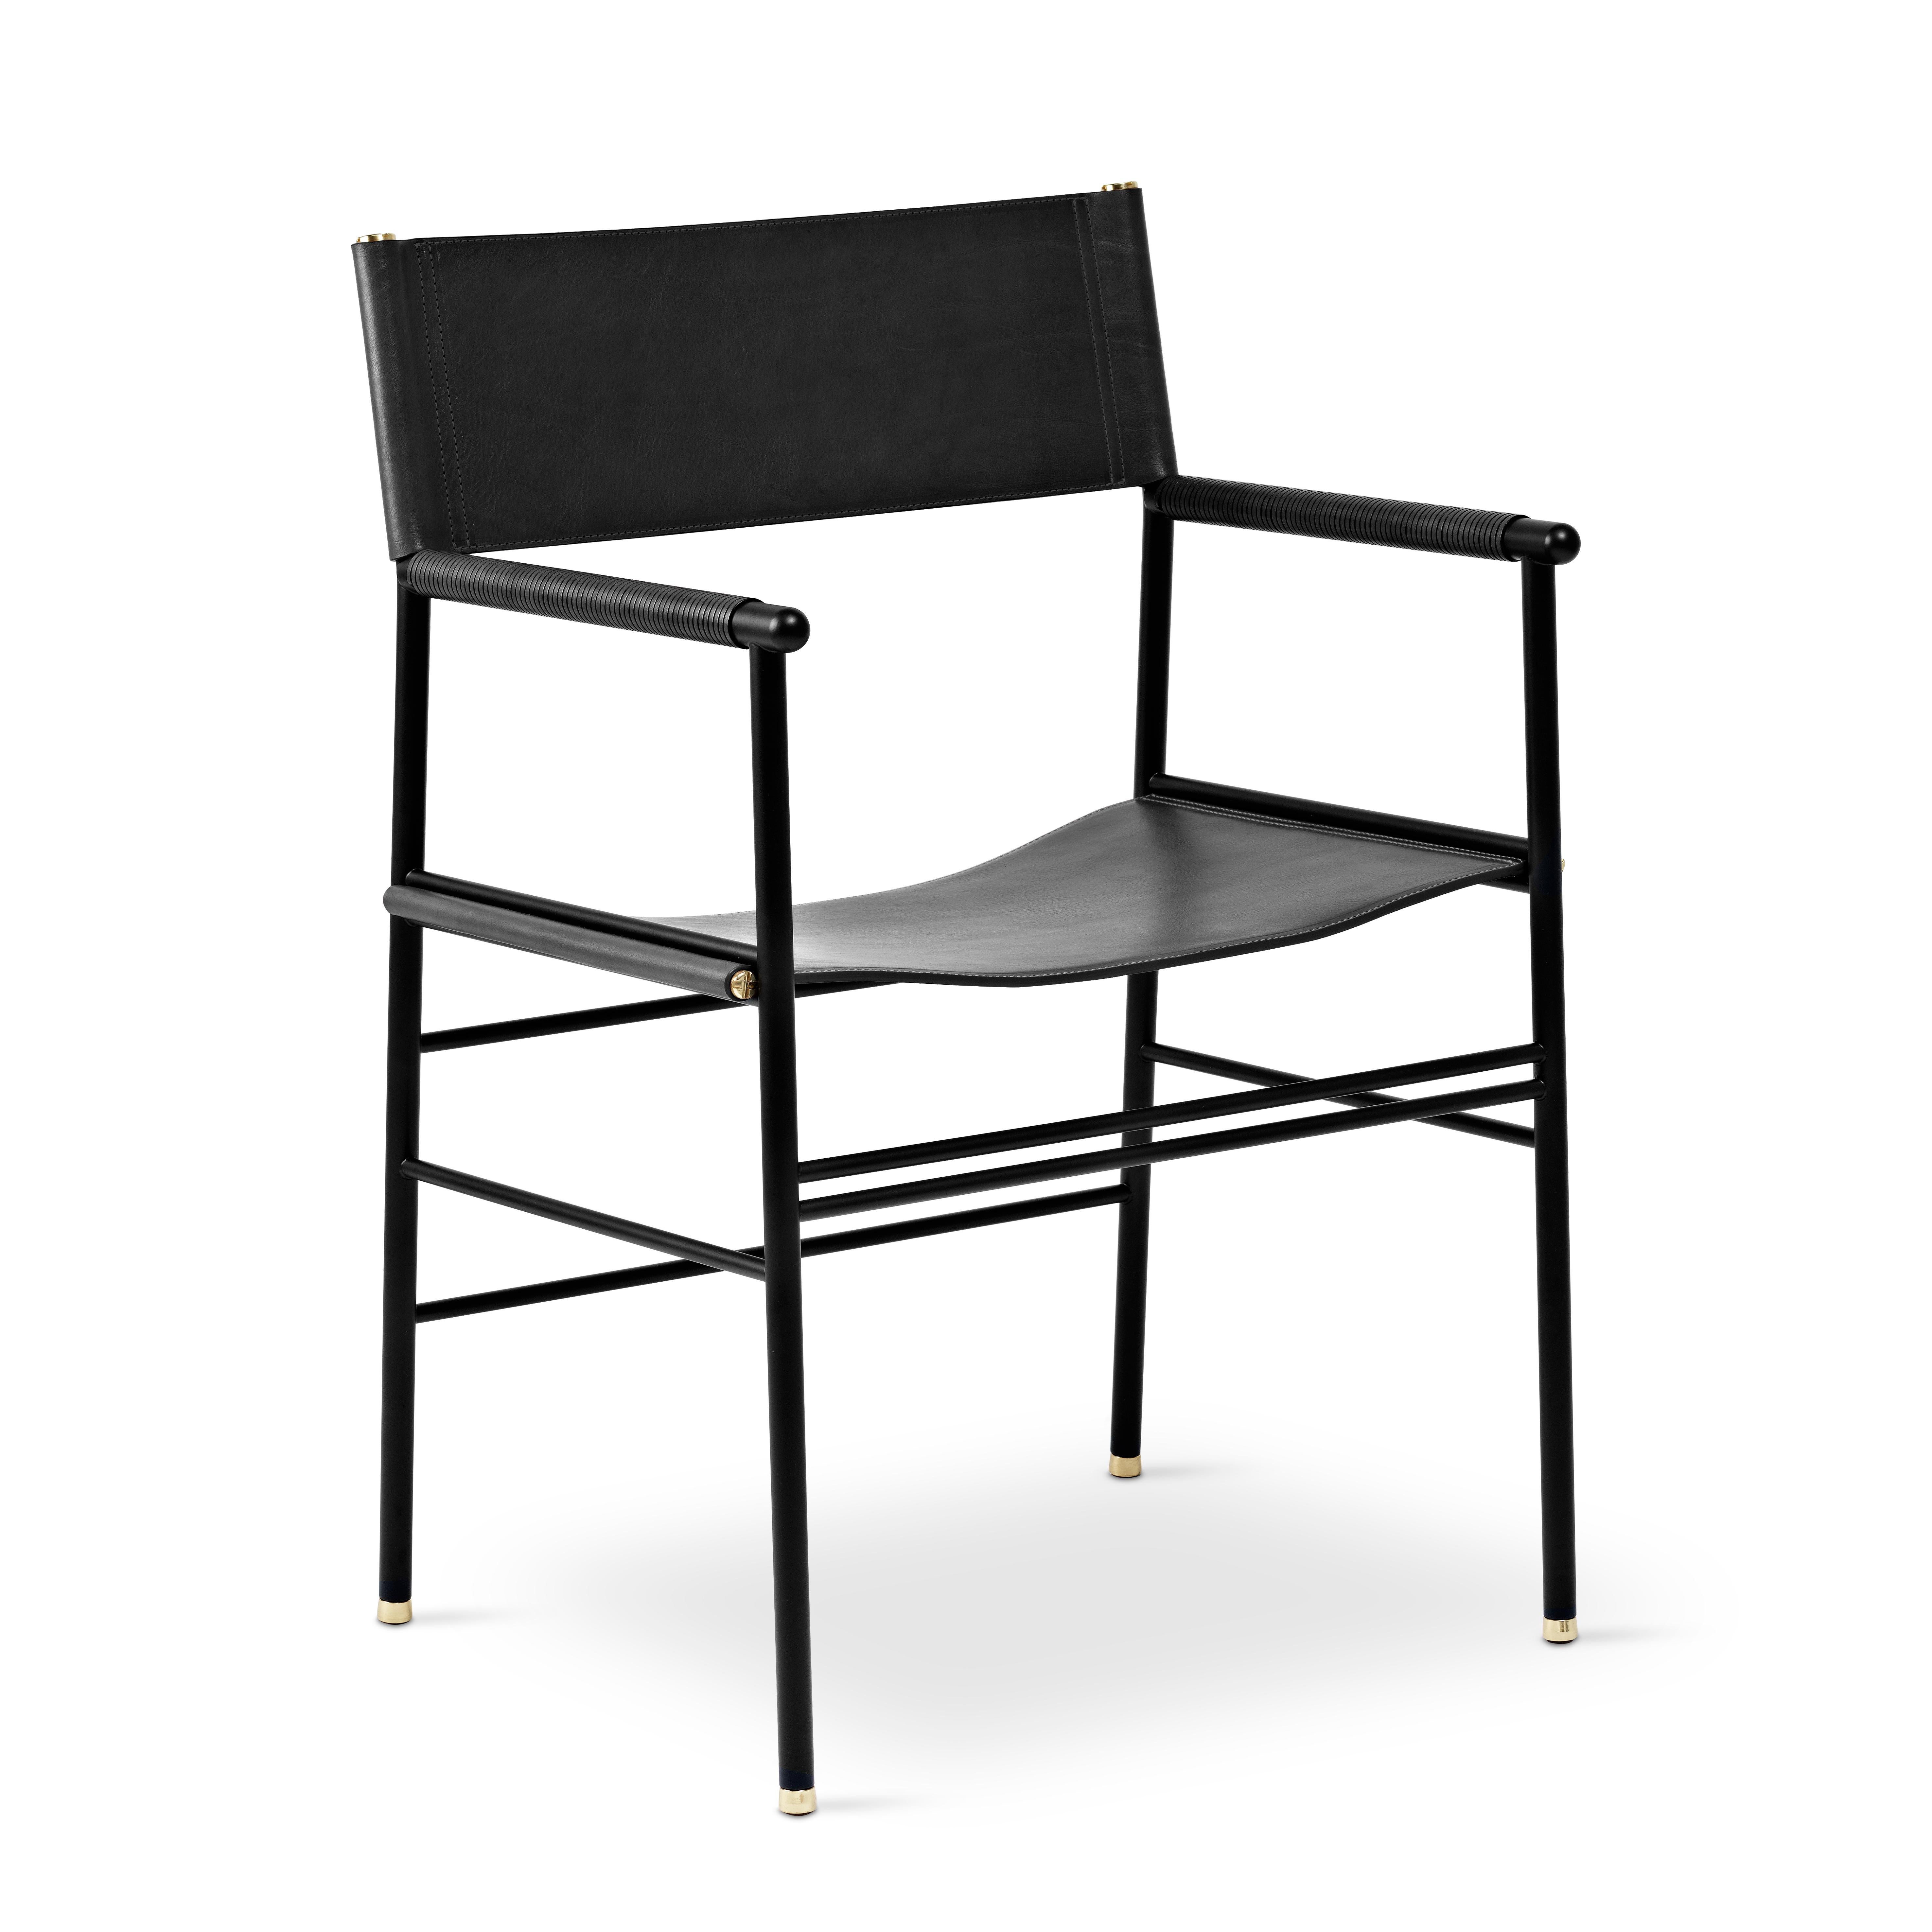 Spanish Set of 5 Artisanal Contemporary Chair Black Leather & Black Rubber Metal For Sale